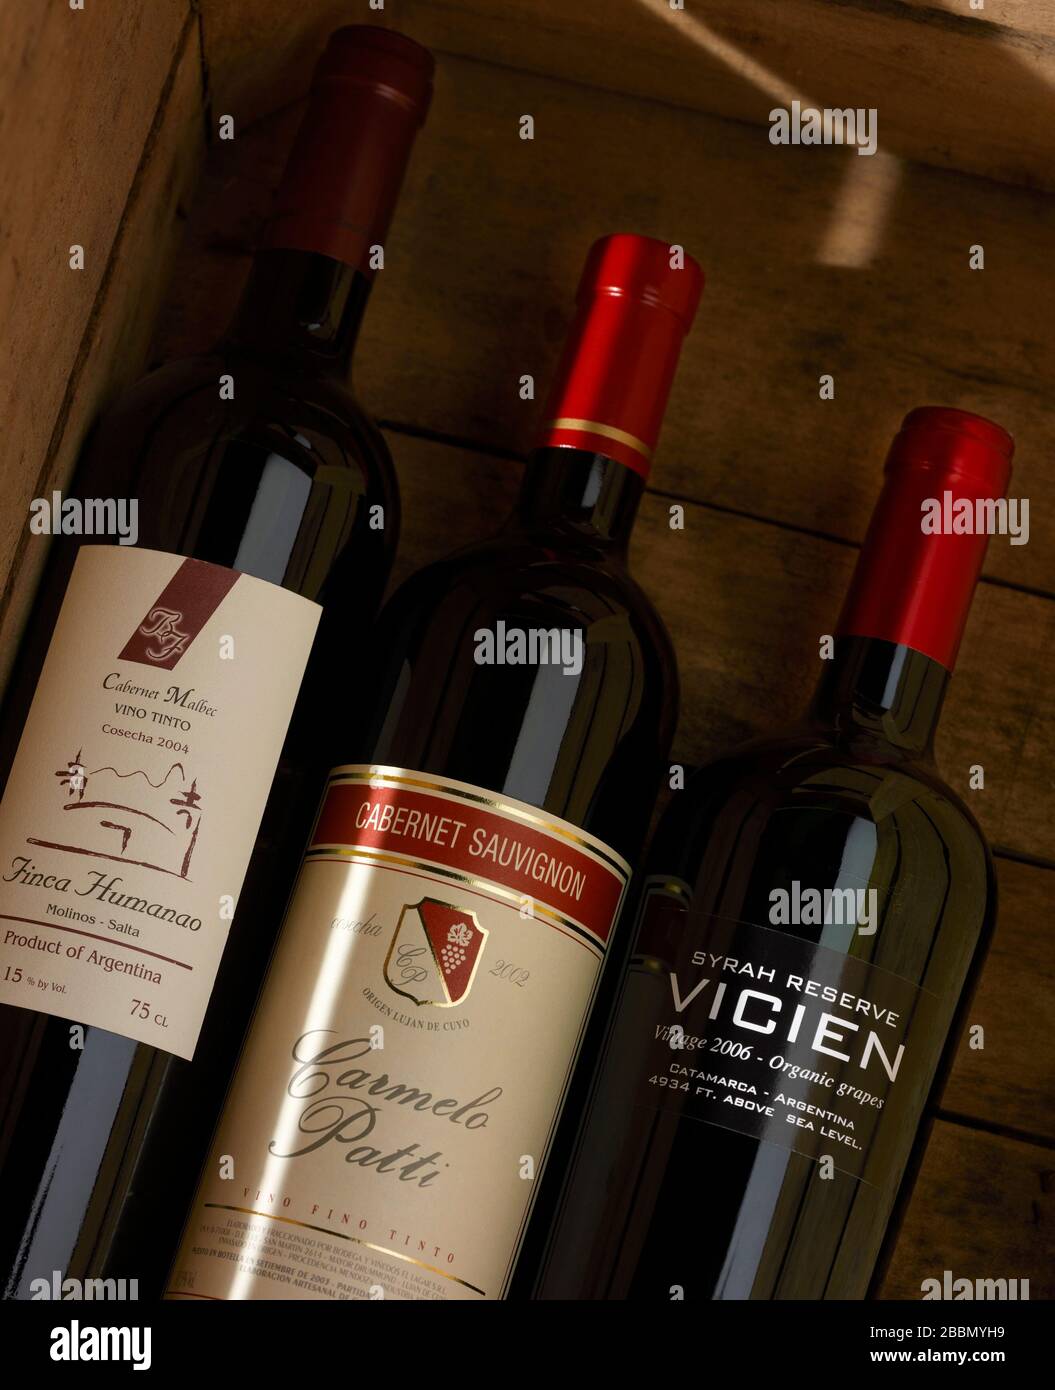 Three red wine bottles in a wooden case Stock Photo